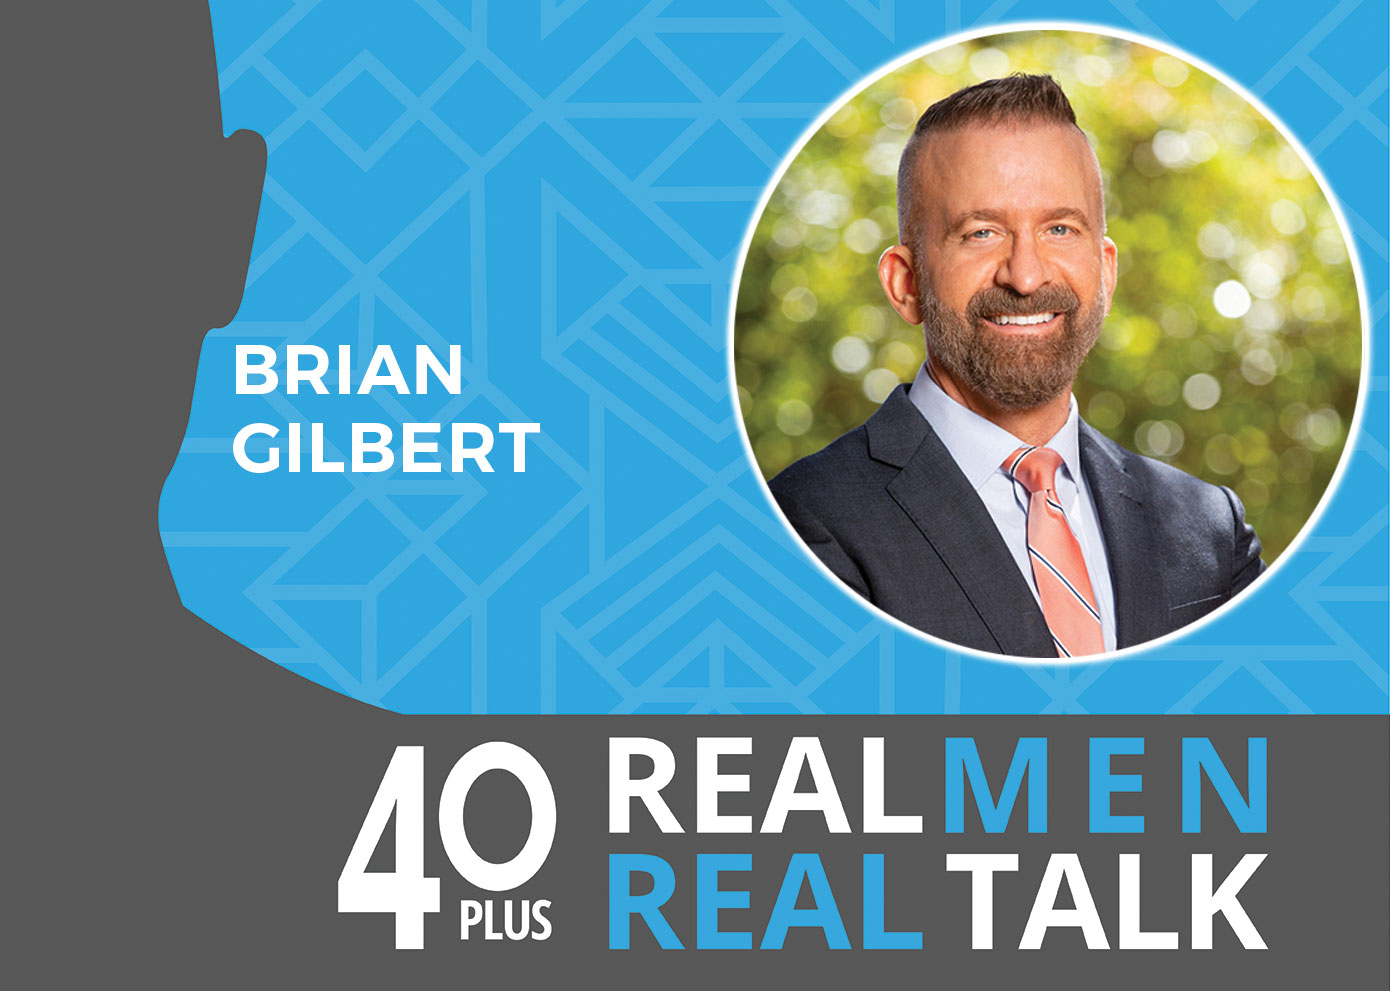 40 Plus: Real Men. Real Talk. How to get real about our changing bodies.